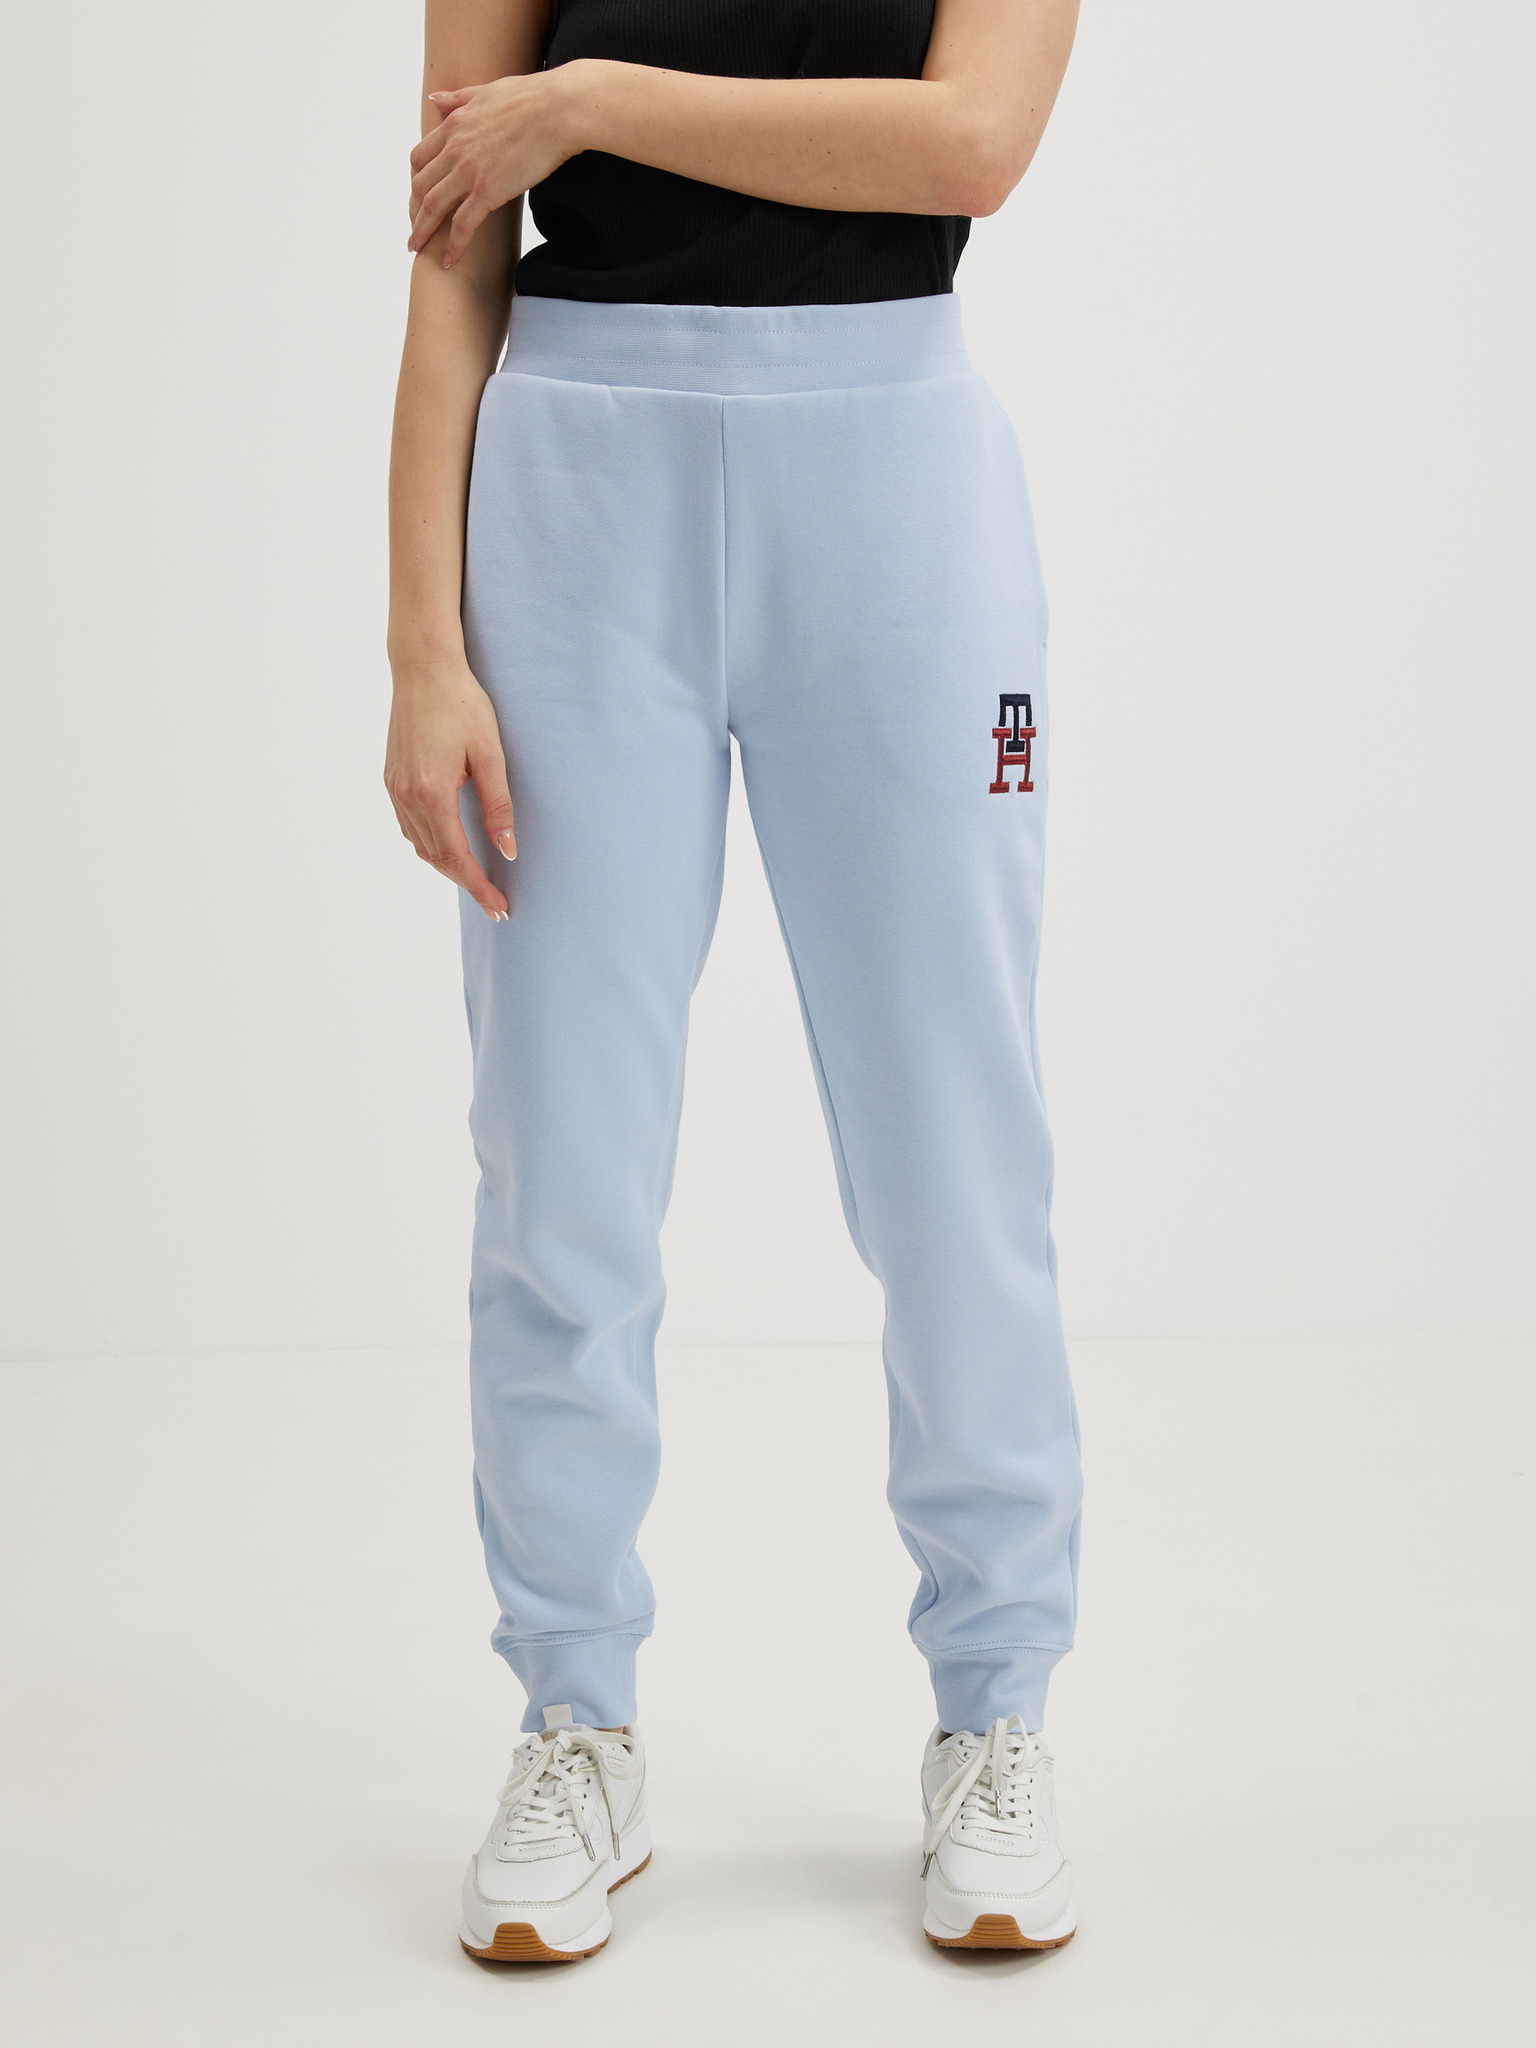 TOMMY HILFIGER Women's Relaxed-Fit Sweatpants